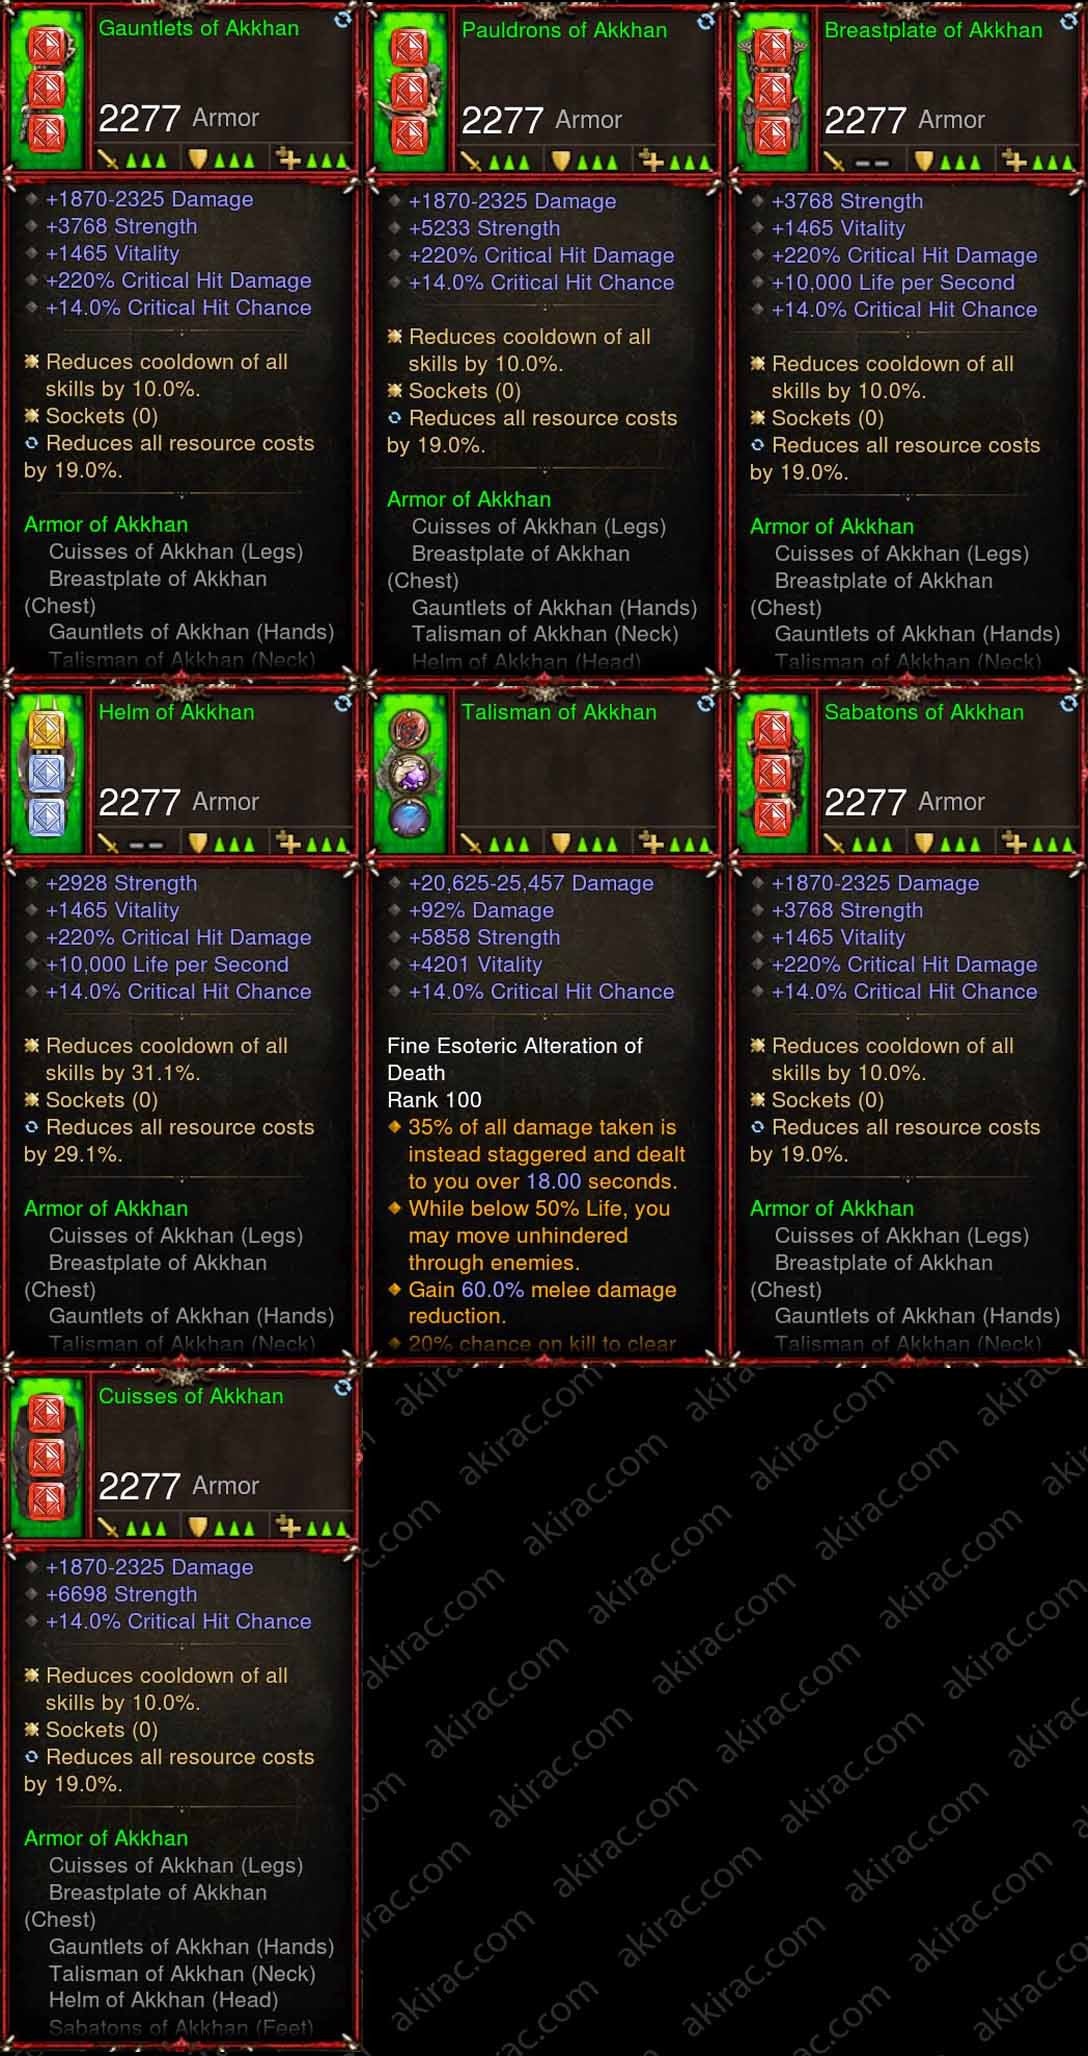 [Primal Ancient] 7x Piece Akkhan's Crusader Set Diablo 3 Mods ROS Seasonal and Non Seasonal Save Mod - Modded Items and Gear - Hacks - Cheats - Trainers for Playstation 4 - Playstation 5 - Nintendo Switch - Xbox One